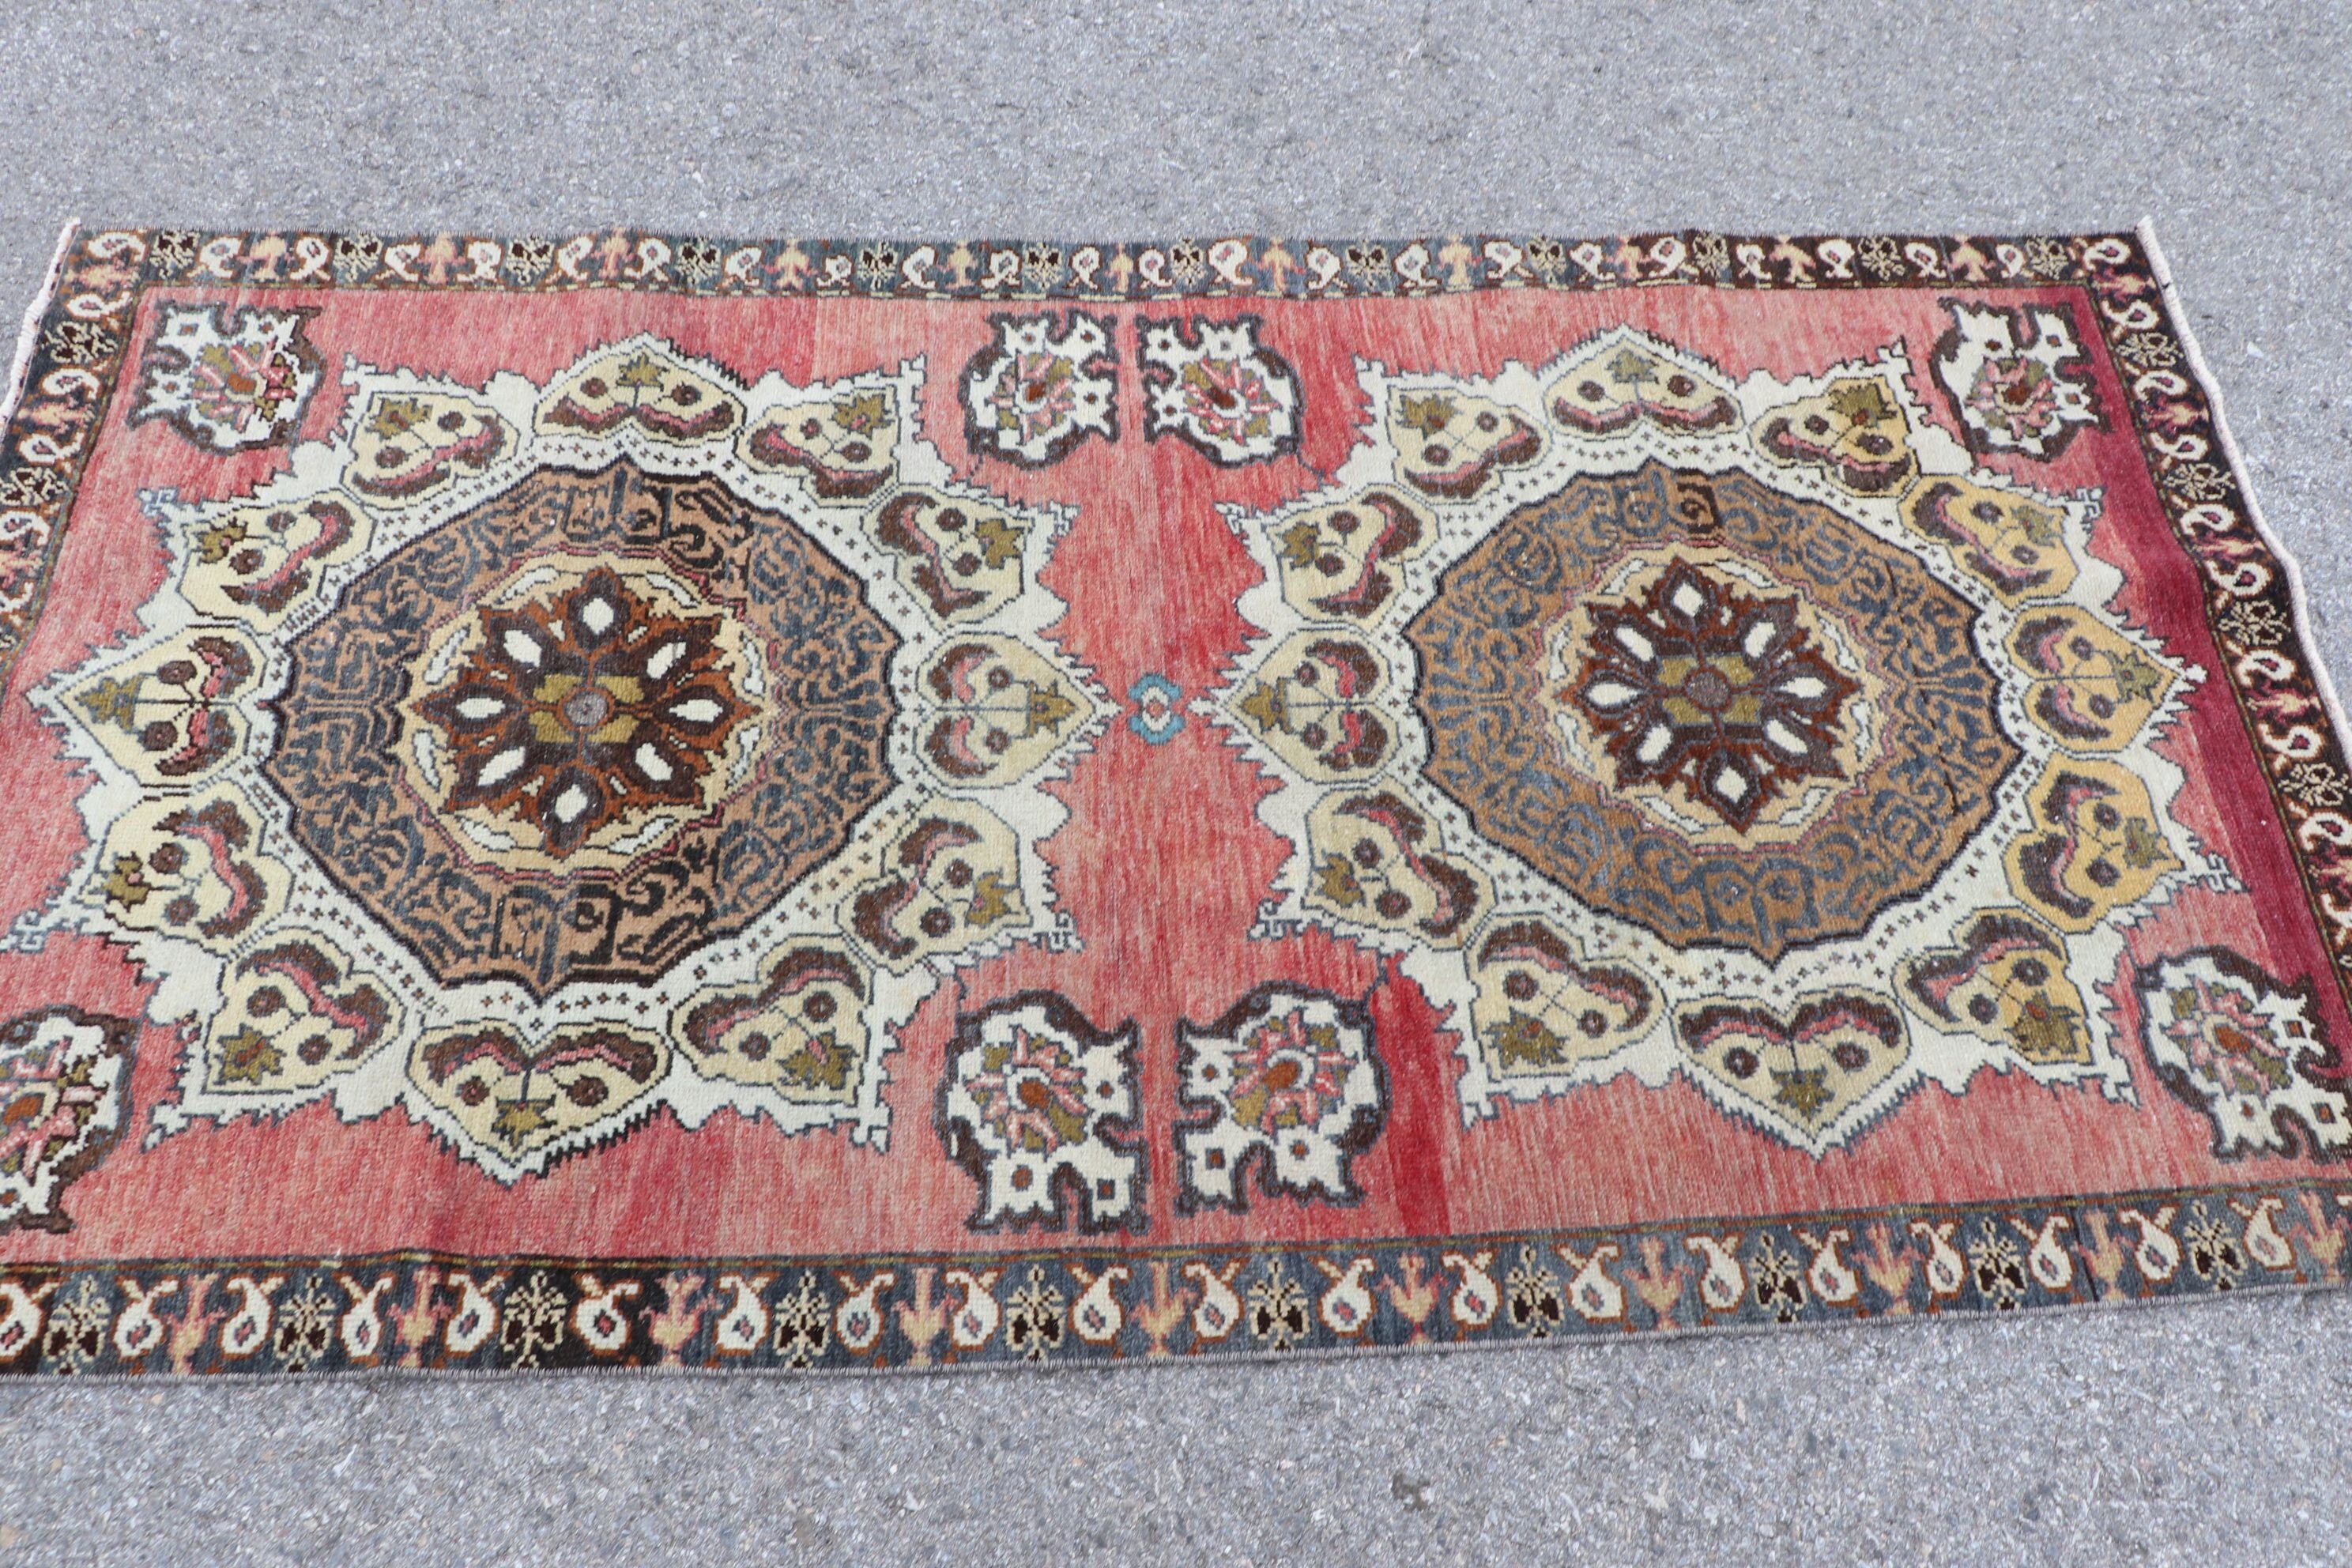 Vintage Rug, Kitchen Rugs, Entry Rugs, Beige  3.1x5.9 ft Accent Rug, Moroccan Rug, Rugs for Entry, Turkish Rug, Bedroom Rug